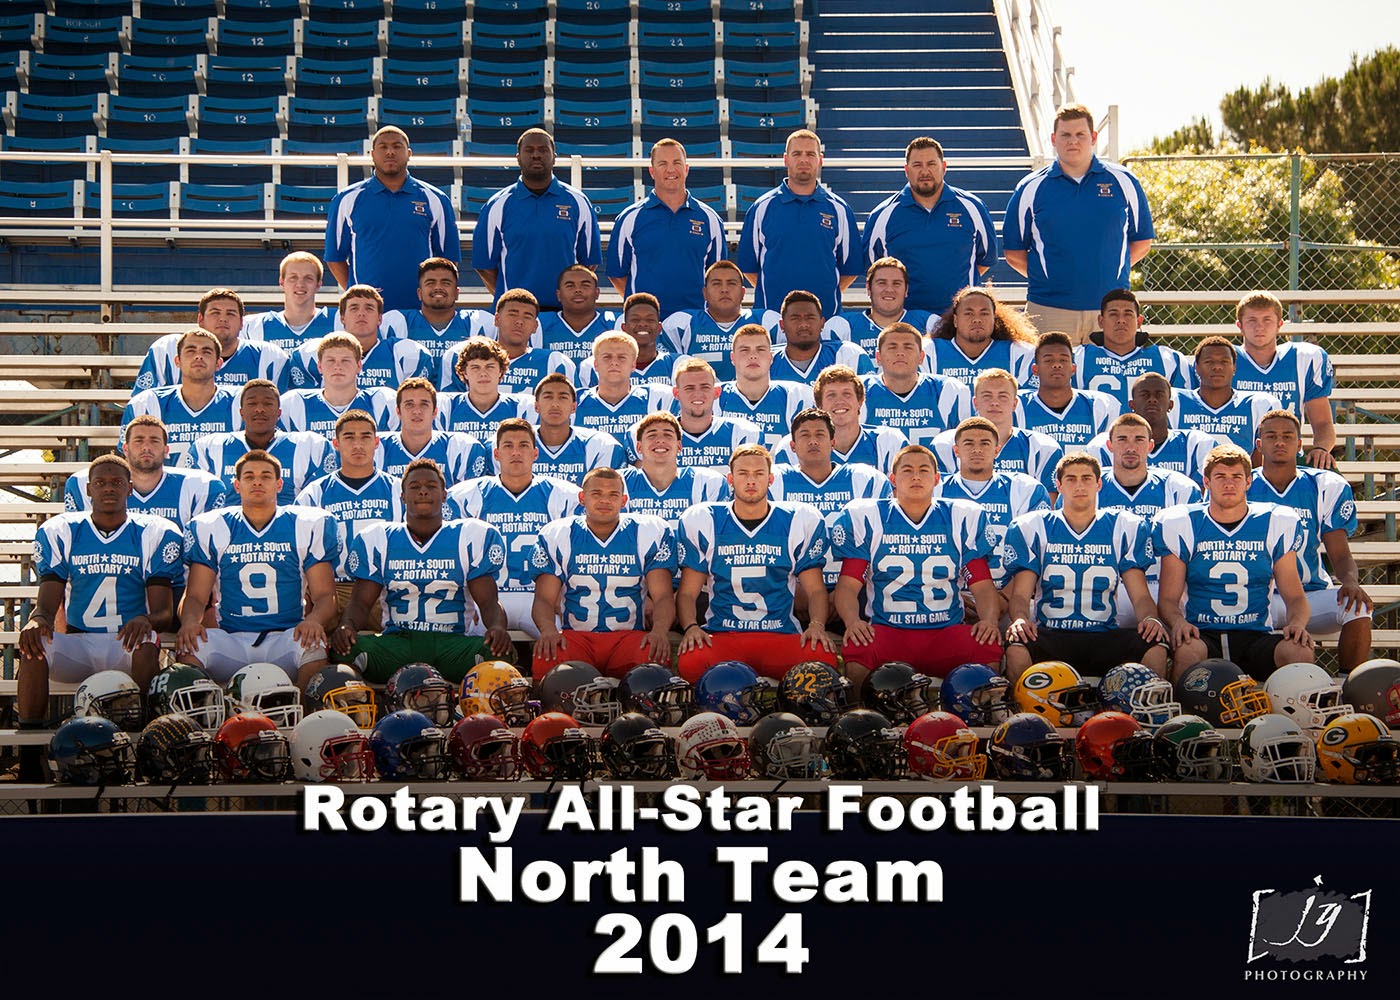 ***North/South Rotary All-Star Football Game***: Photos